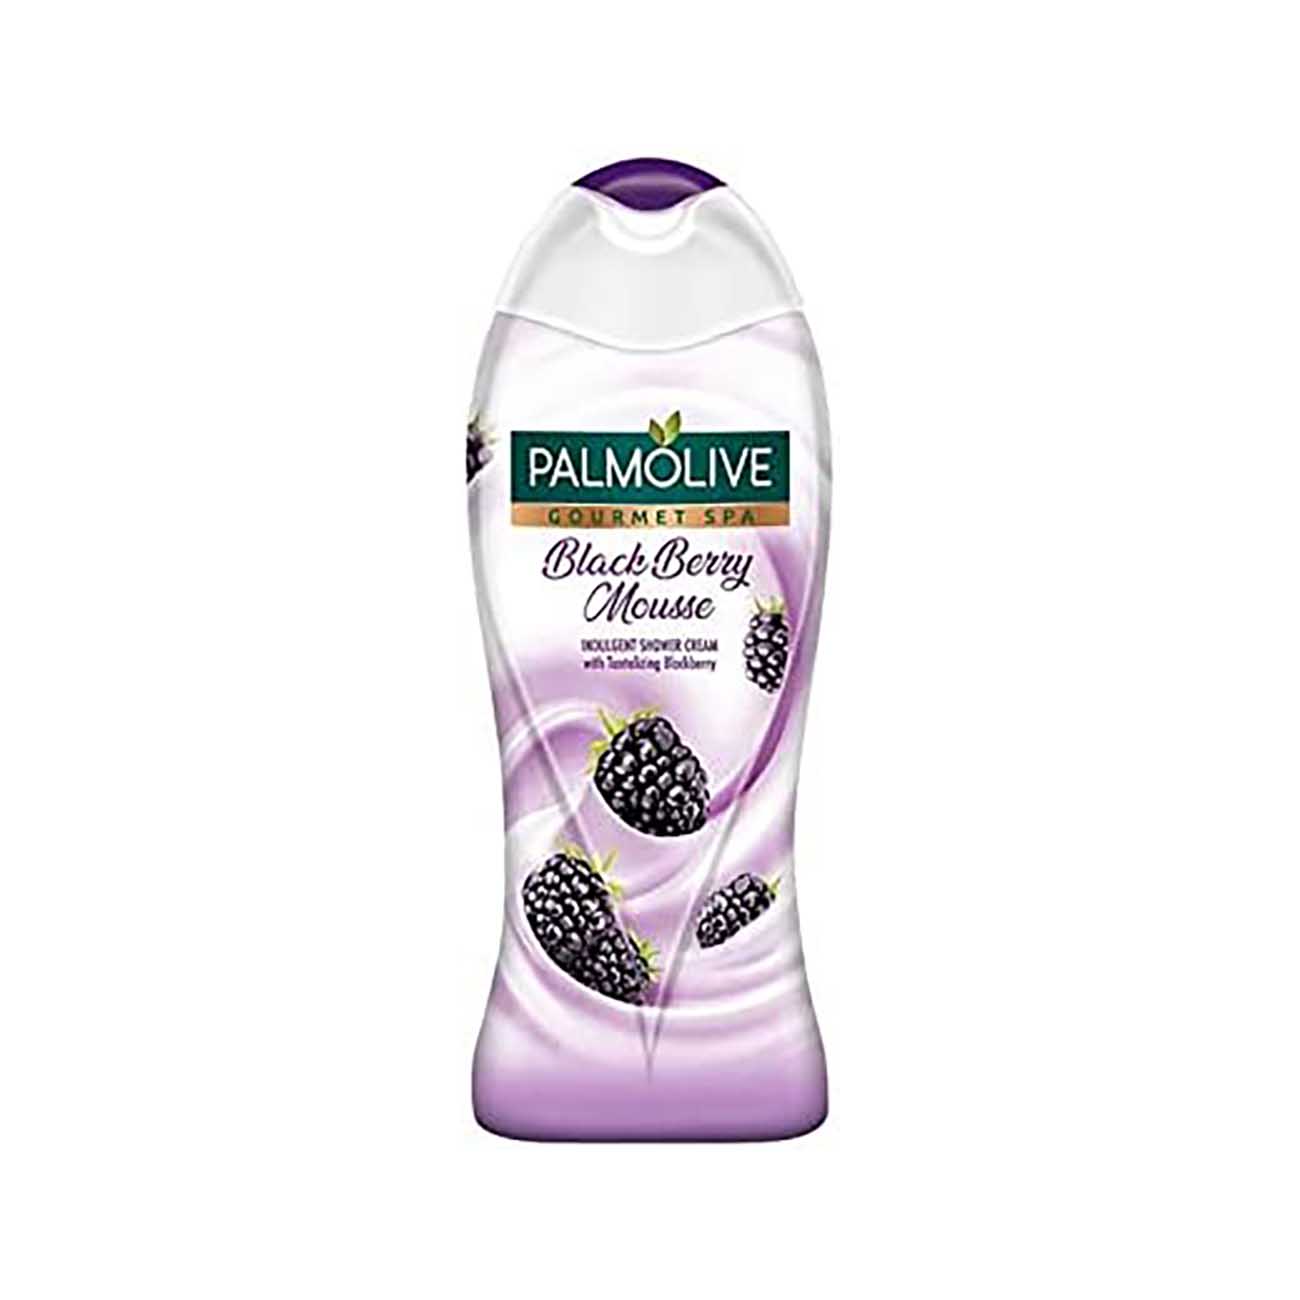 Palmolive Cream, Scented Blackberry Mousse, Dermatologically Tested, Soap Free Shower Gel for Gourmet Spa, Body Wash, 500ml